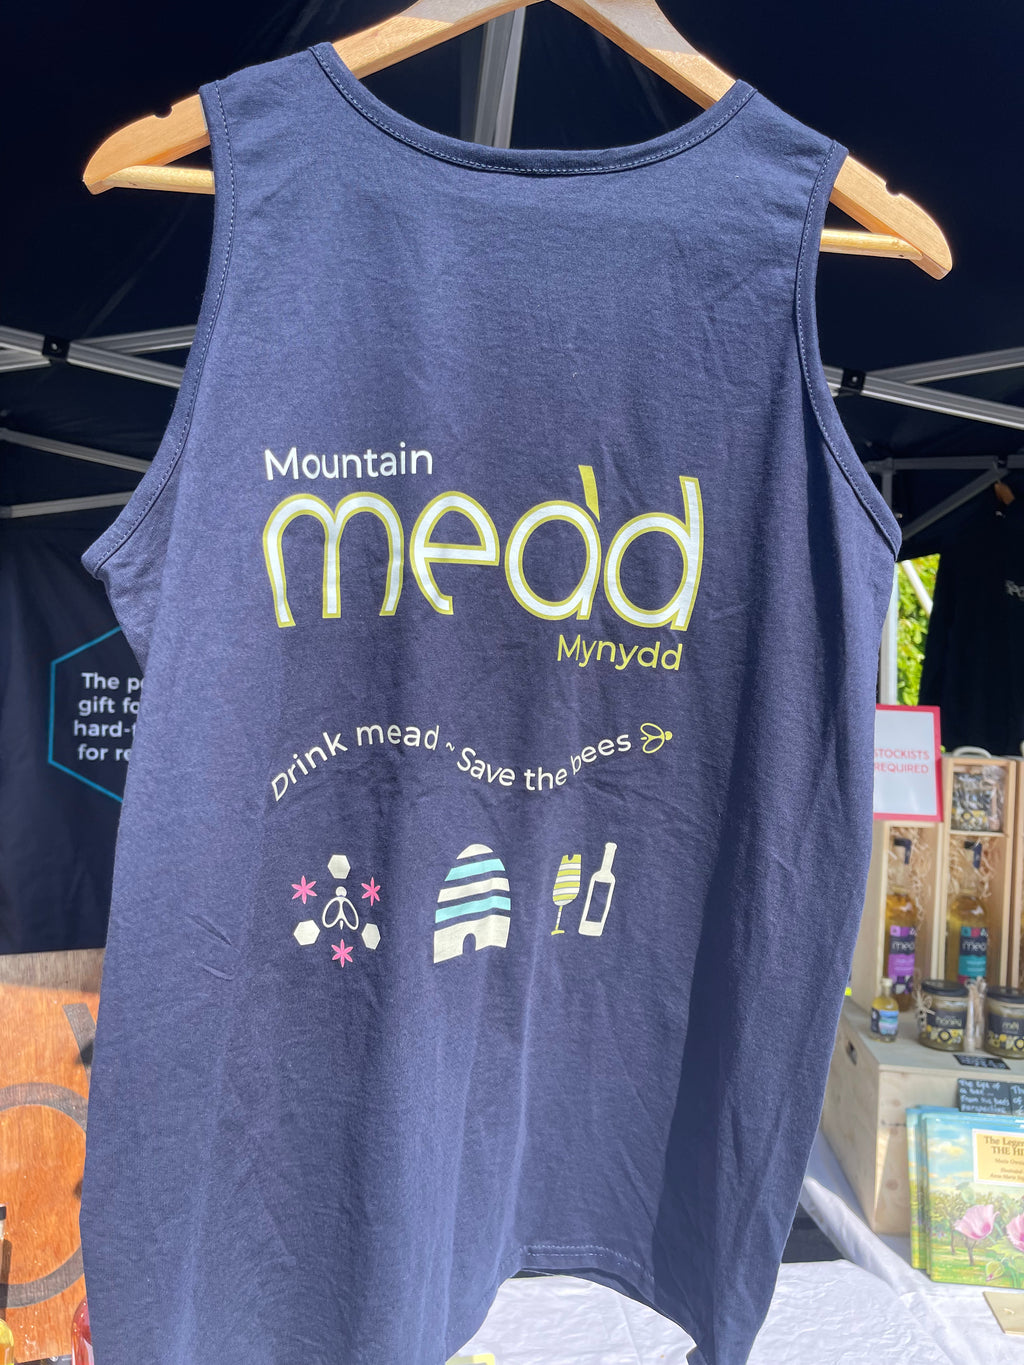 Sleeveless T-Shirt, Organic, - Drink Mead Save The Bees